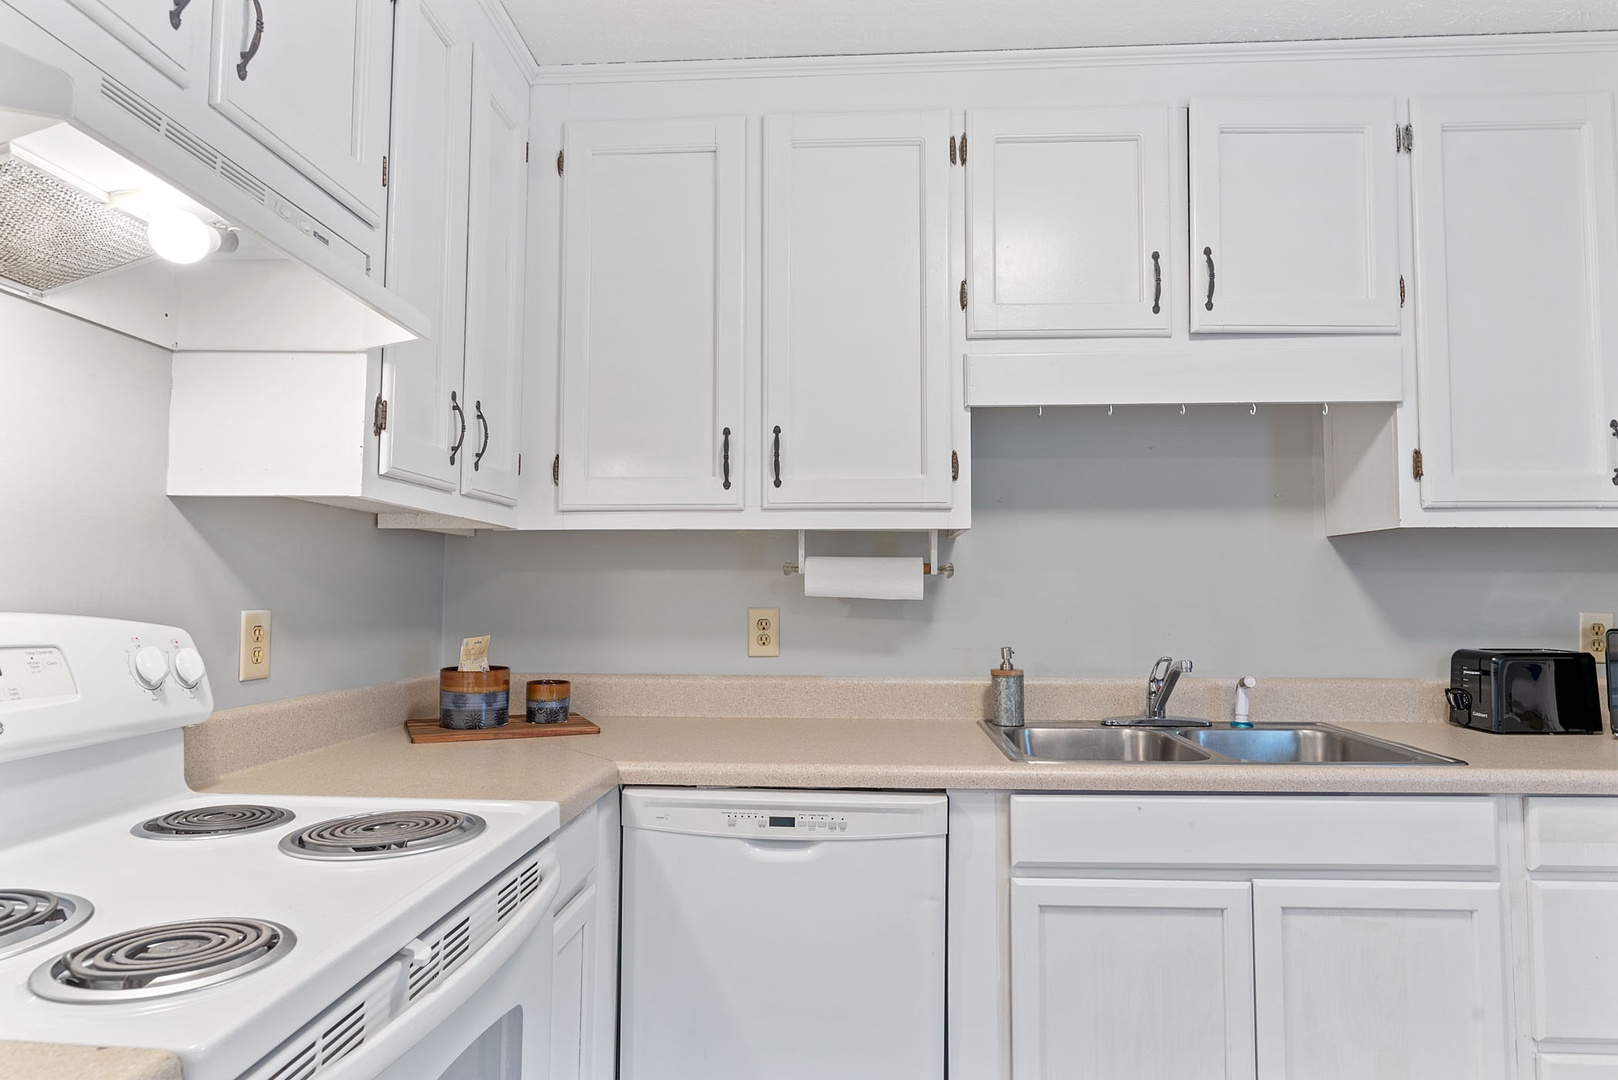 The sunny kitchen offers ample storage space & great amenities